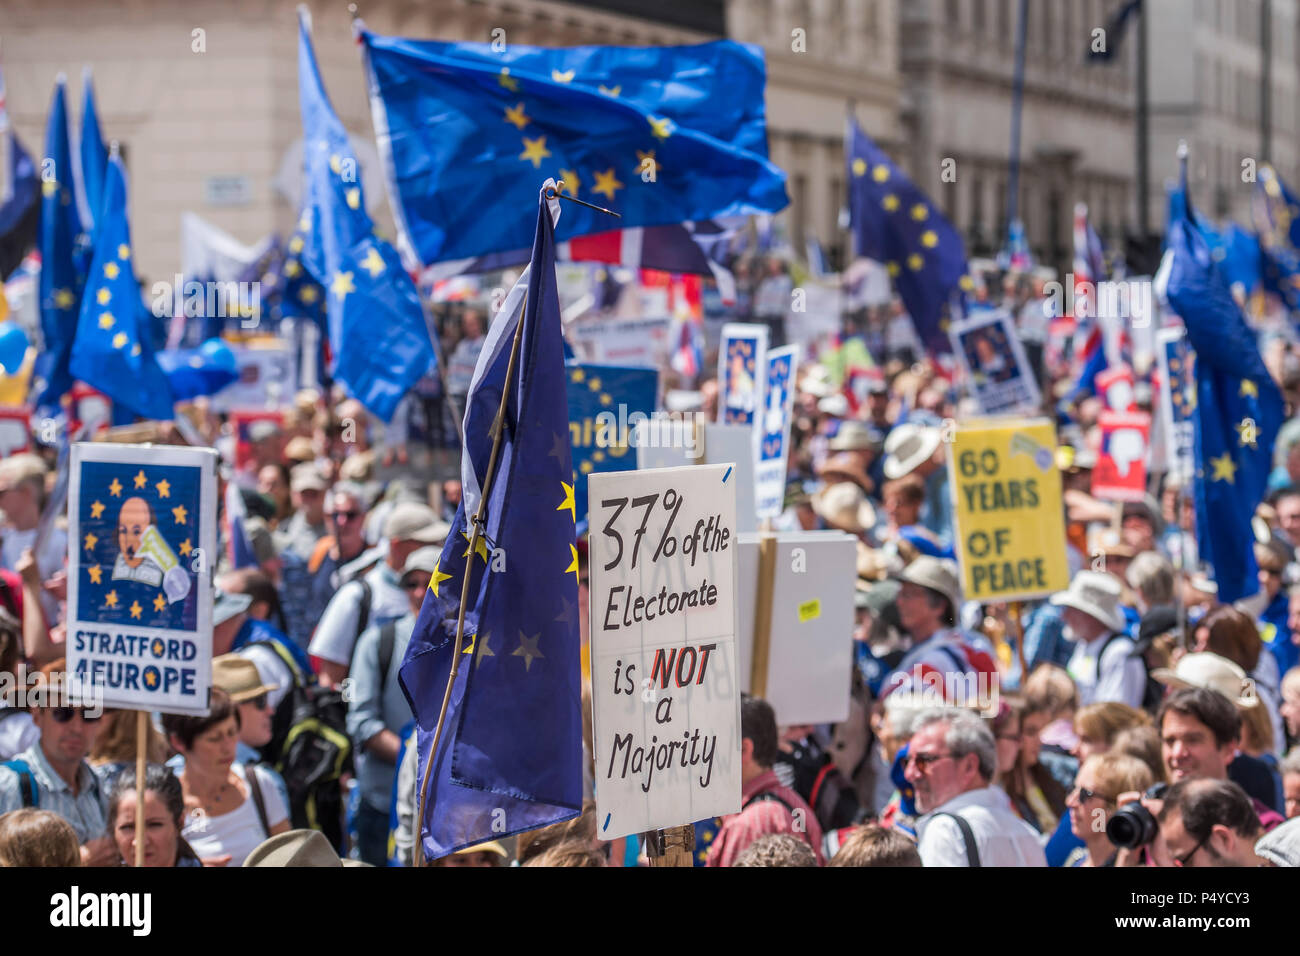 London, UK. 23rd June 2018. Gathering on Pall Mall in front of the Crimea War Memorial and the IOD - People’s March for a People’s Vote on the final Brexit deal.  Timed to coincide with the second anniversary of the 2016 referendum it is organised by anti Brexit, pro EU campaigners. Credit: Guy Bell/Alamy Live News Stock Photo